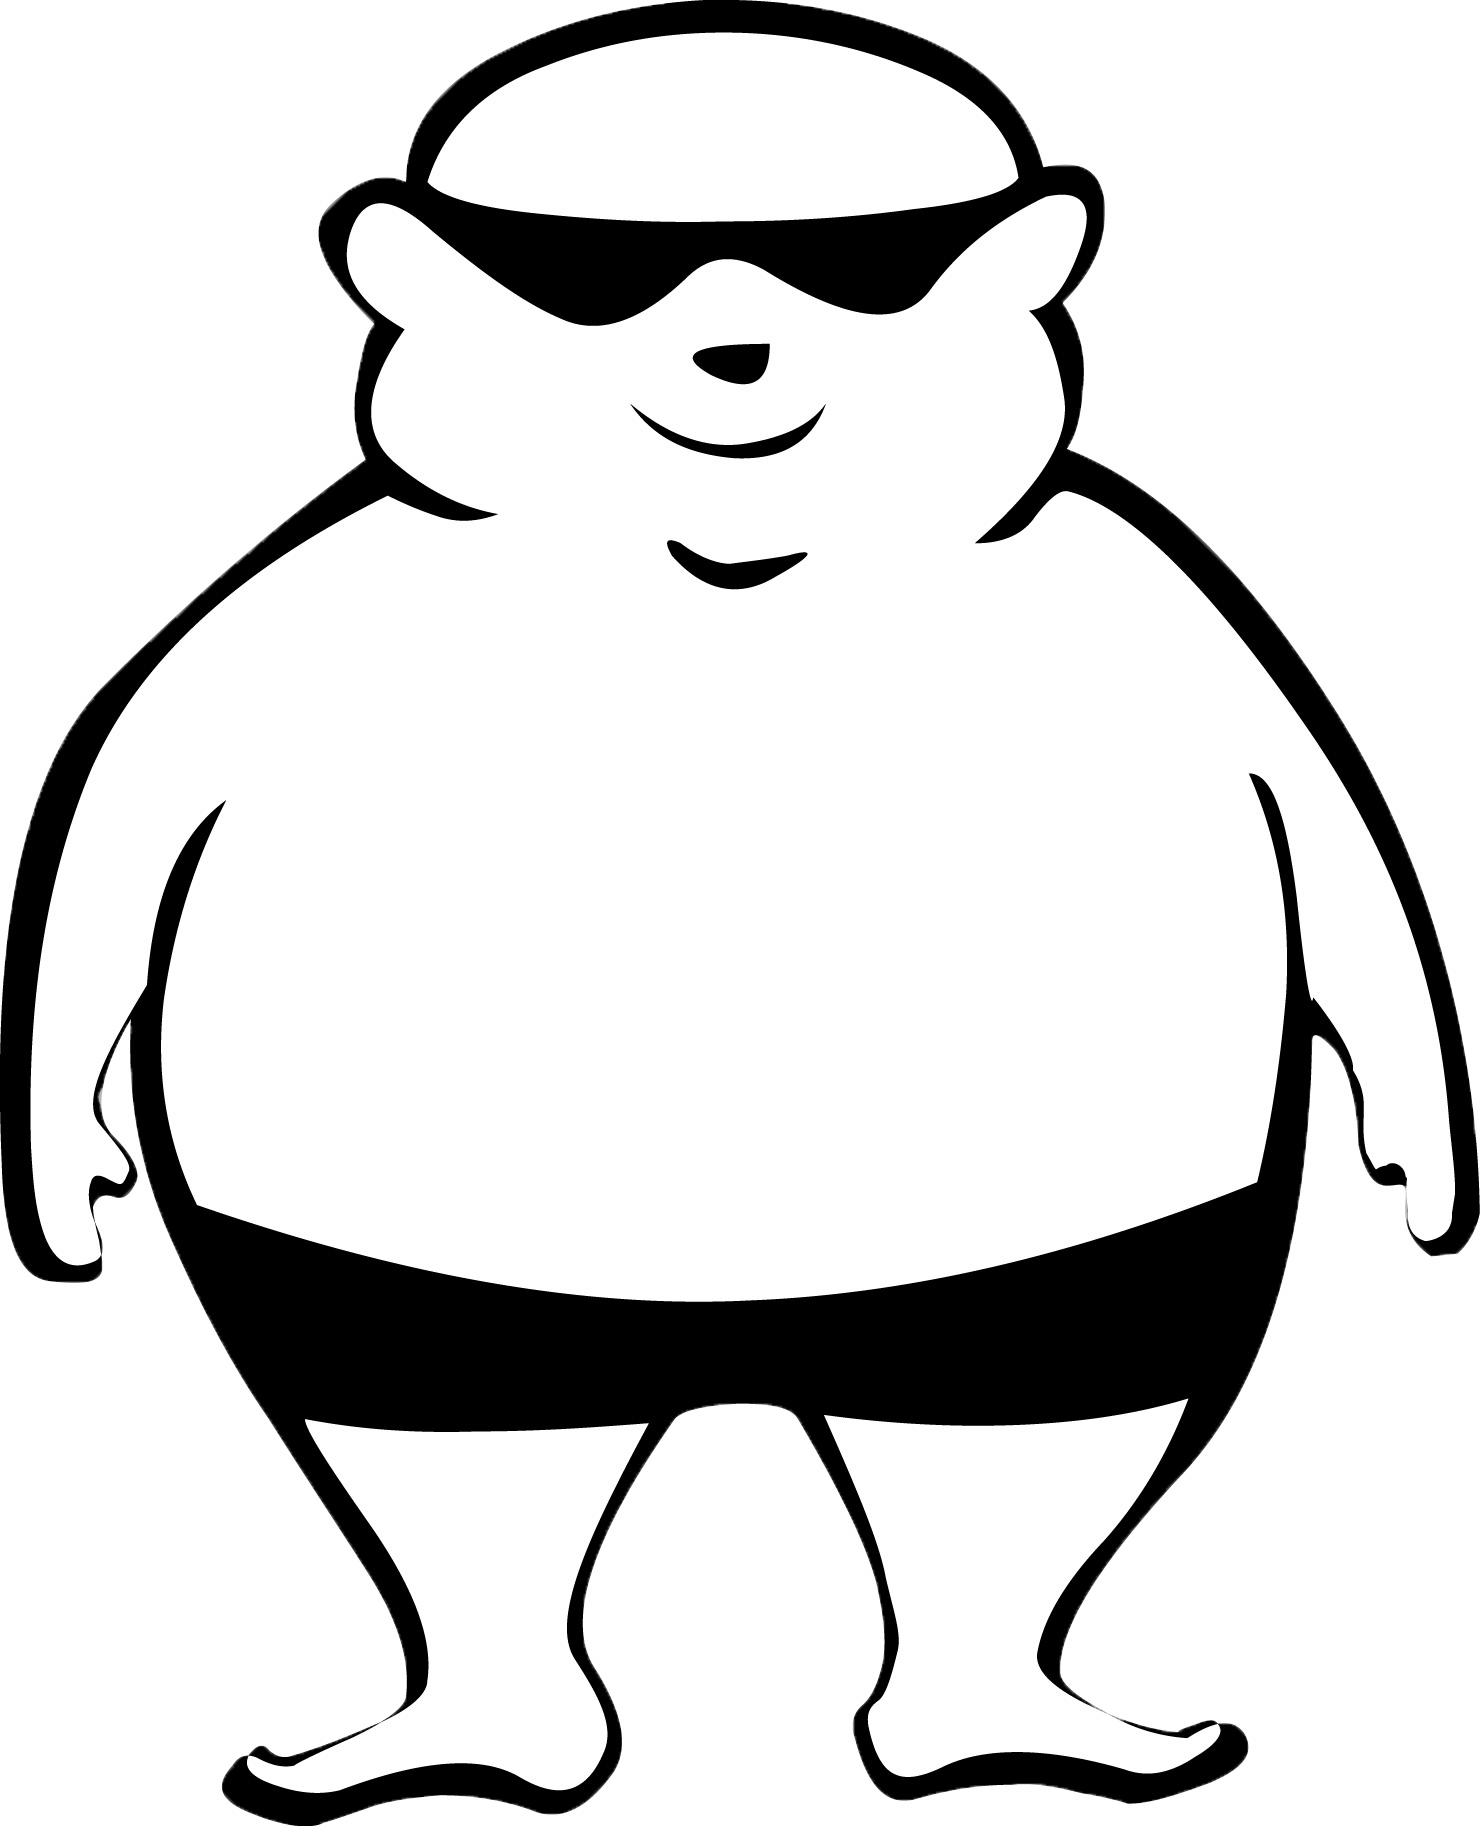 Fat drawing at getdrawings. Pig clipart obese